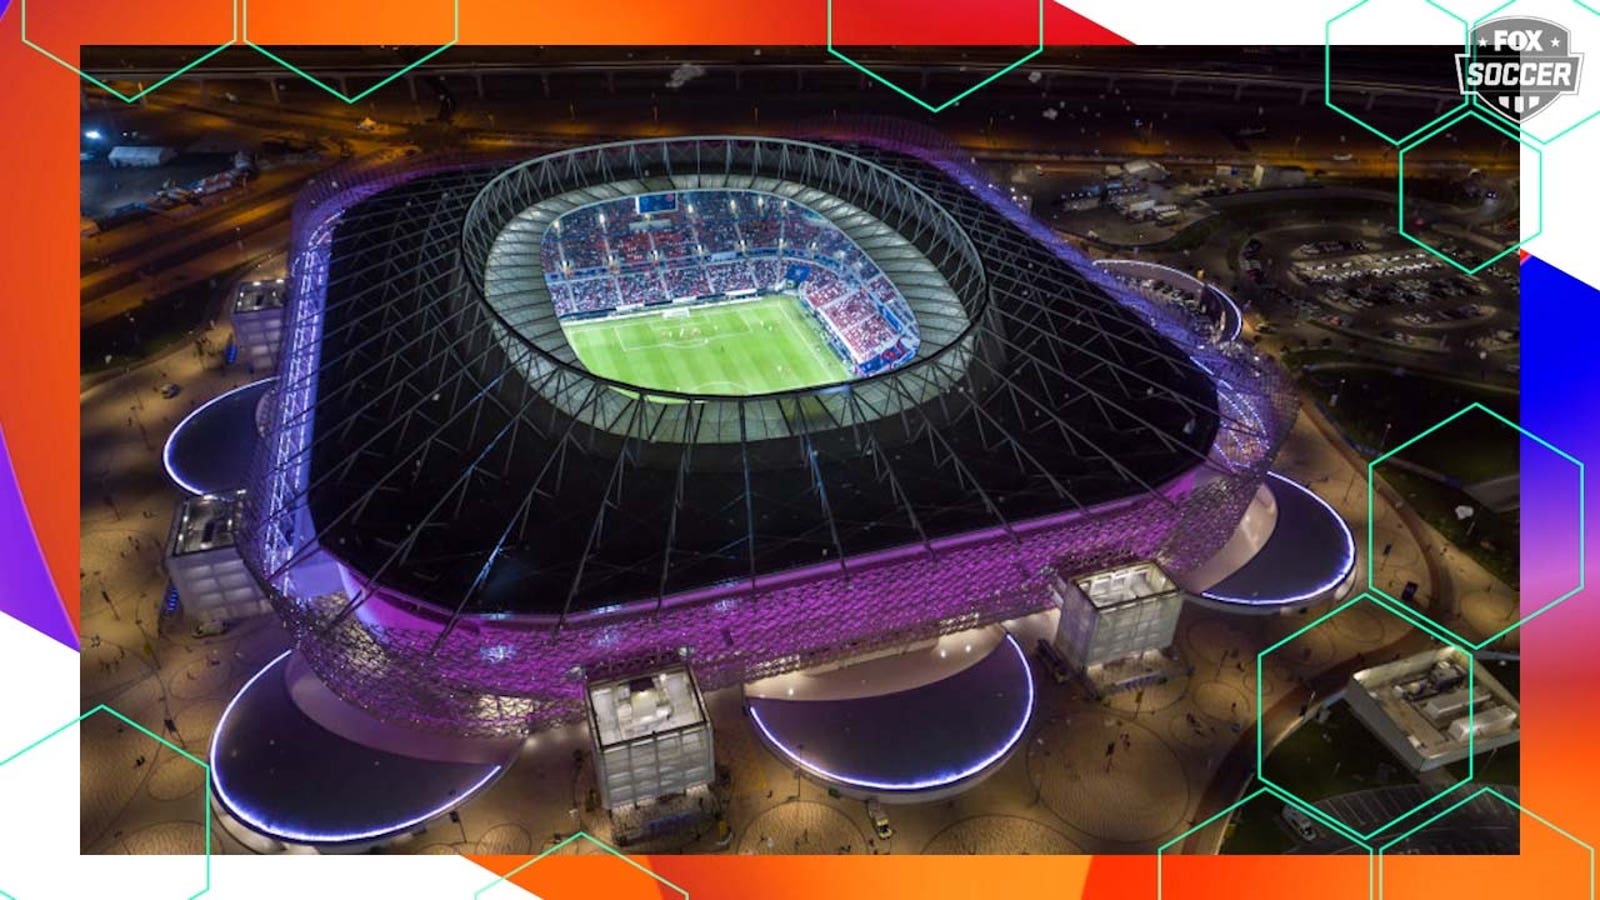 'This World Cup won't be like any before it' — Doug McIntyre on what to expect from the FIFA World Cup Qatar 2022™